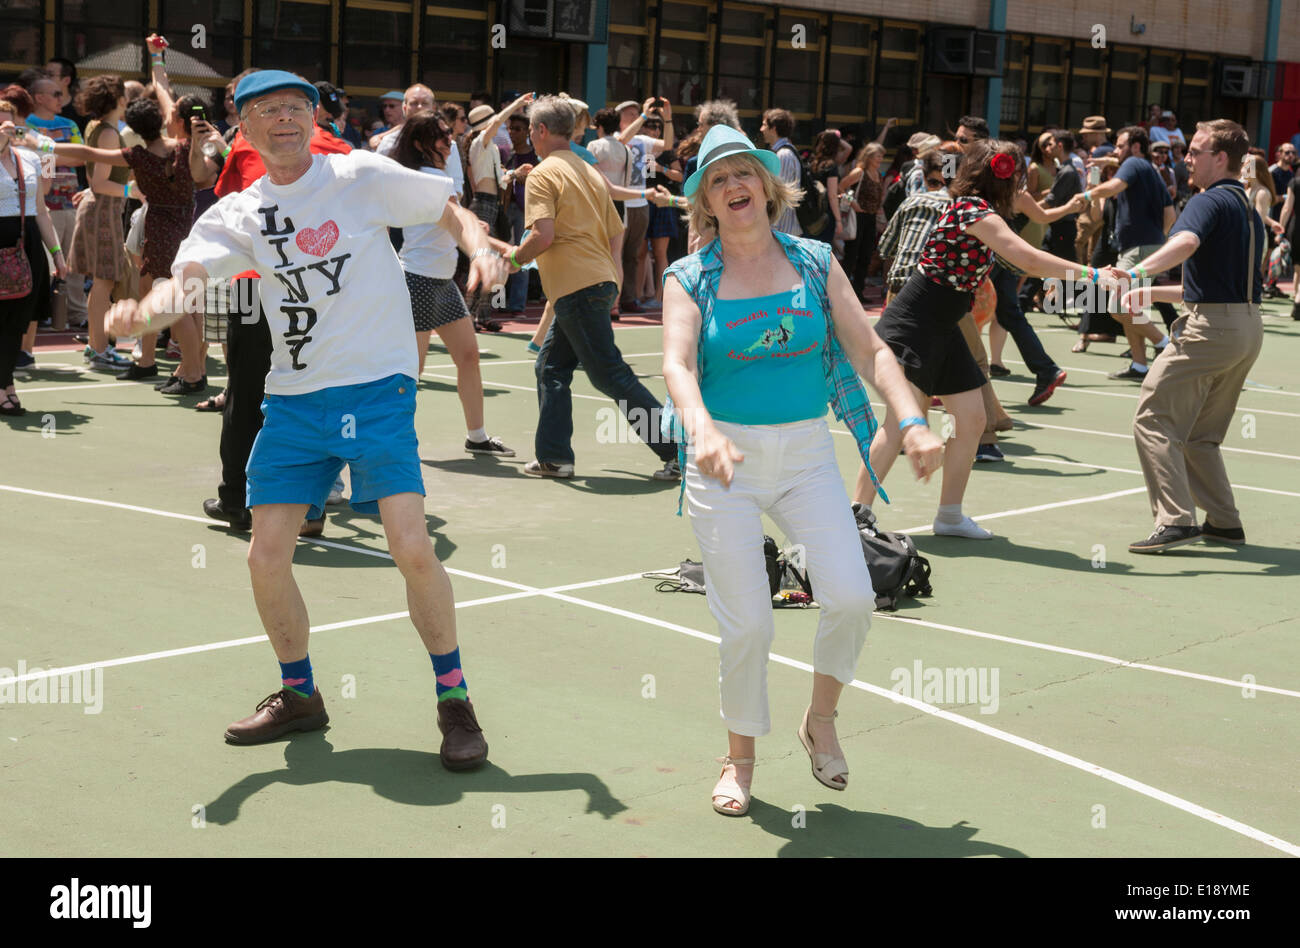 Hundreds of Lindy Hop enthusiasts converge on Harlem in New York to  celebrate World Lindy Hop Day Stock Photo - Alamy